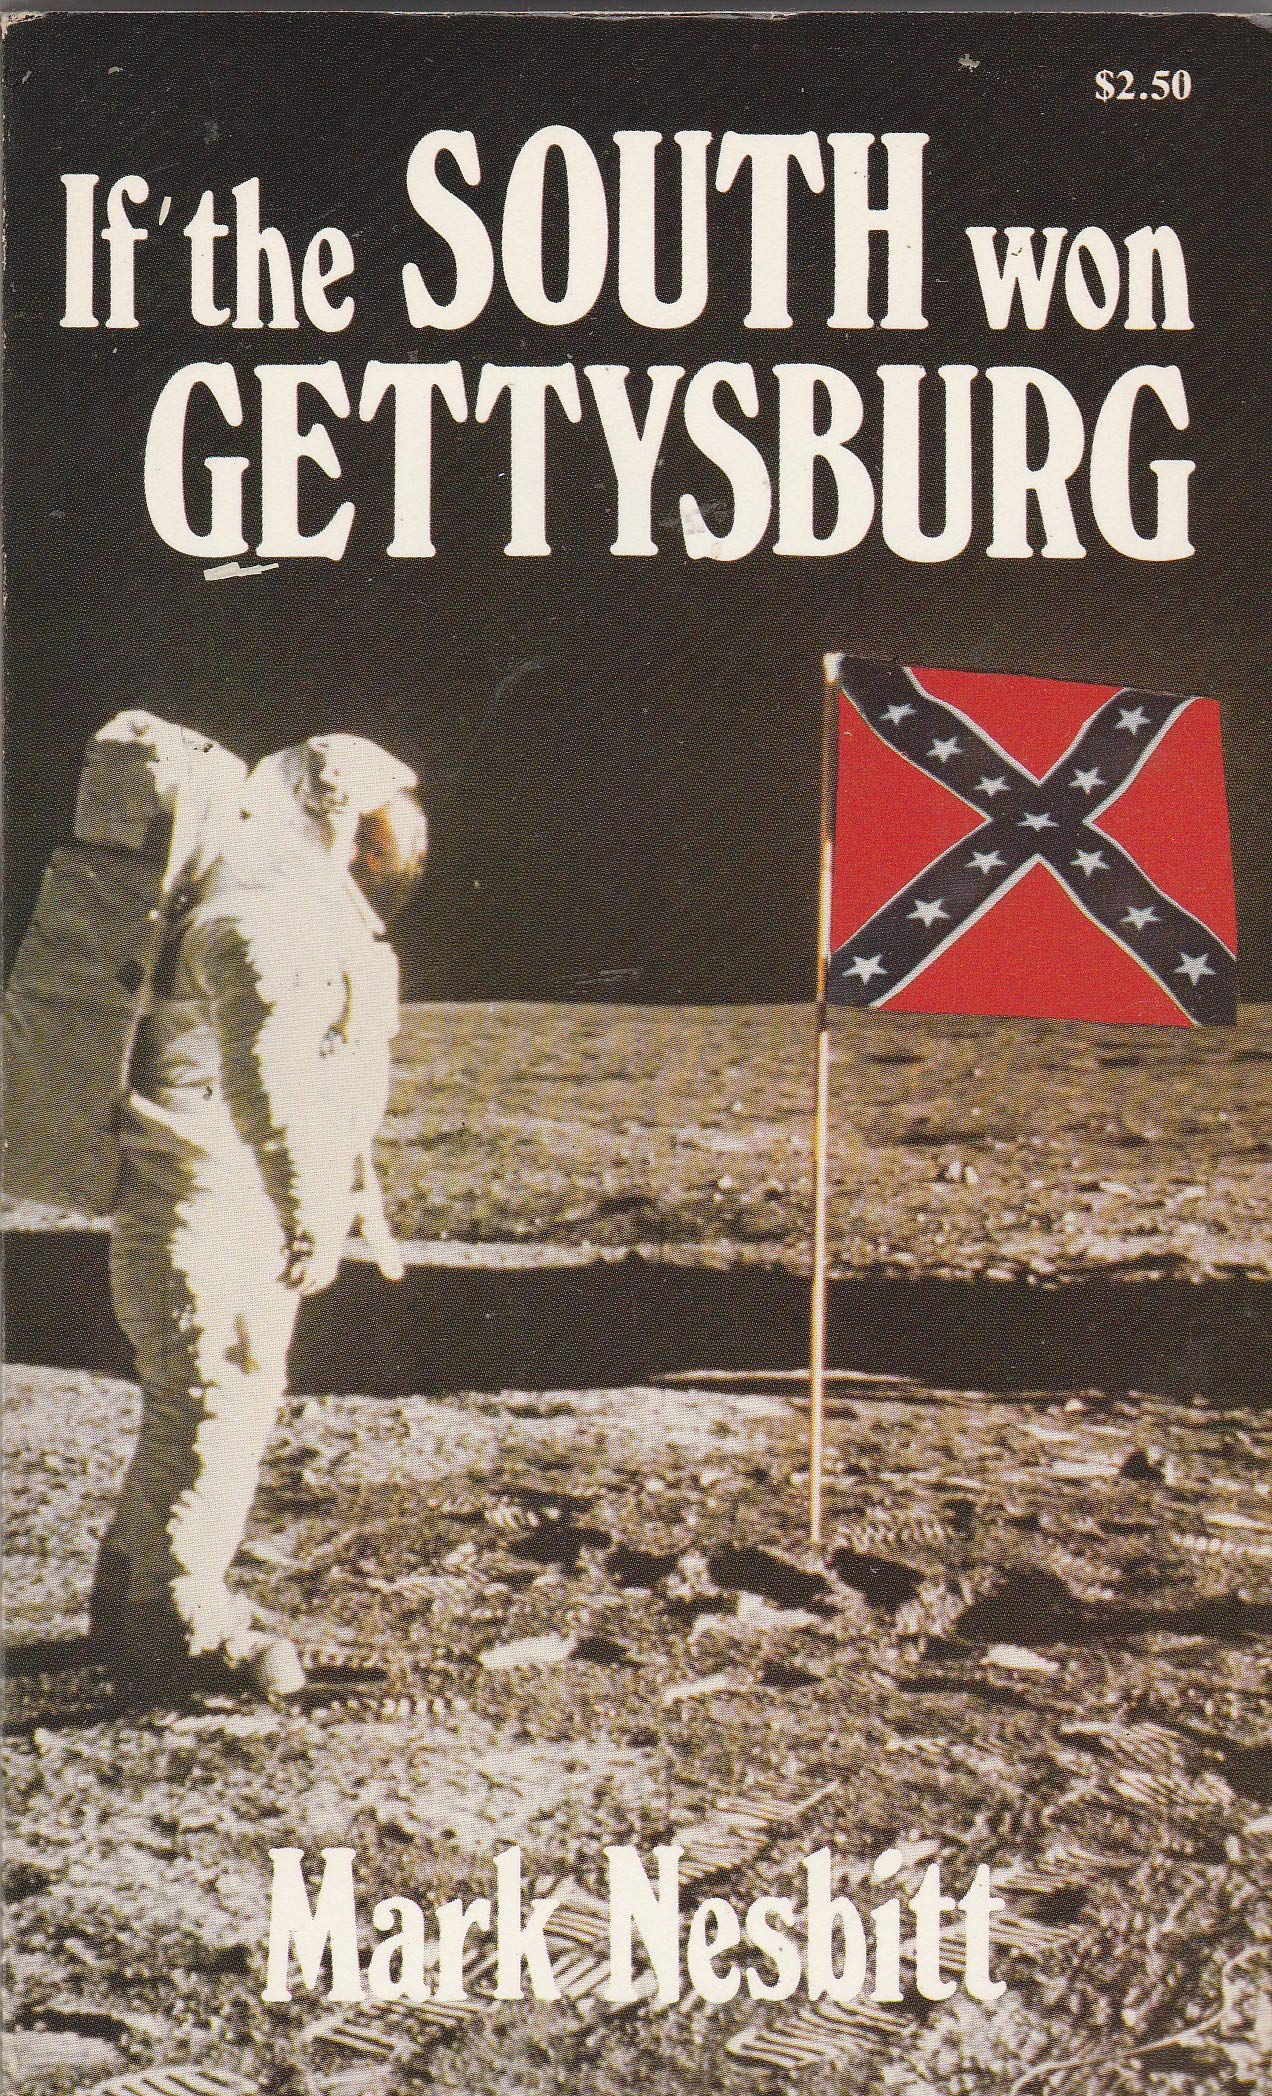 If the South won Gettysburg